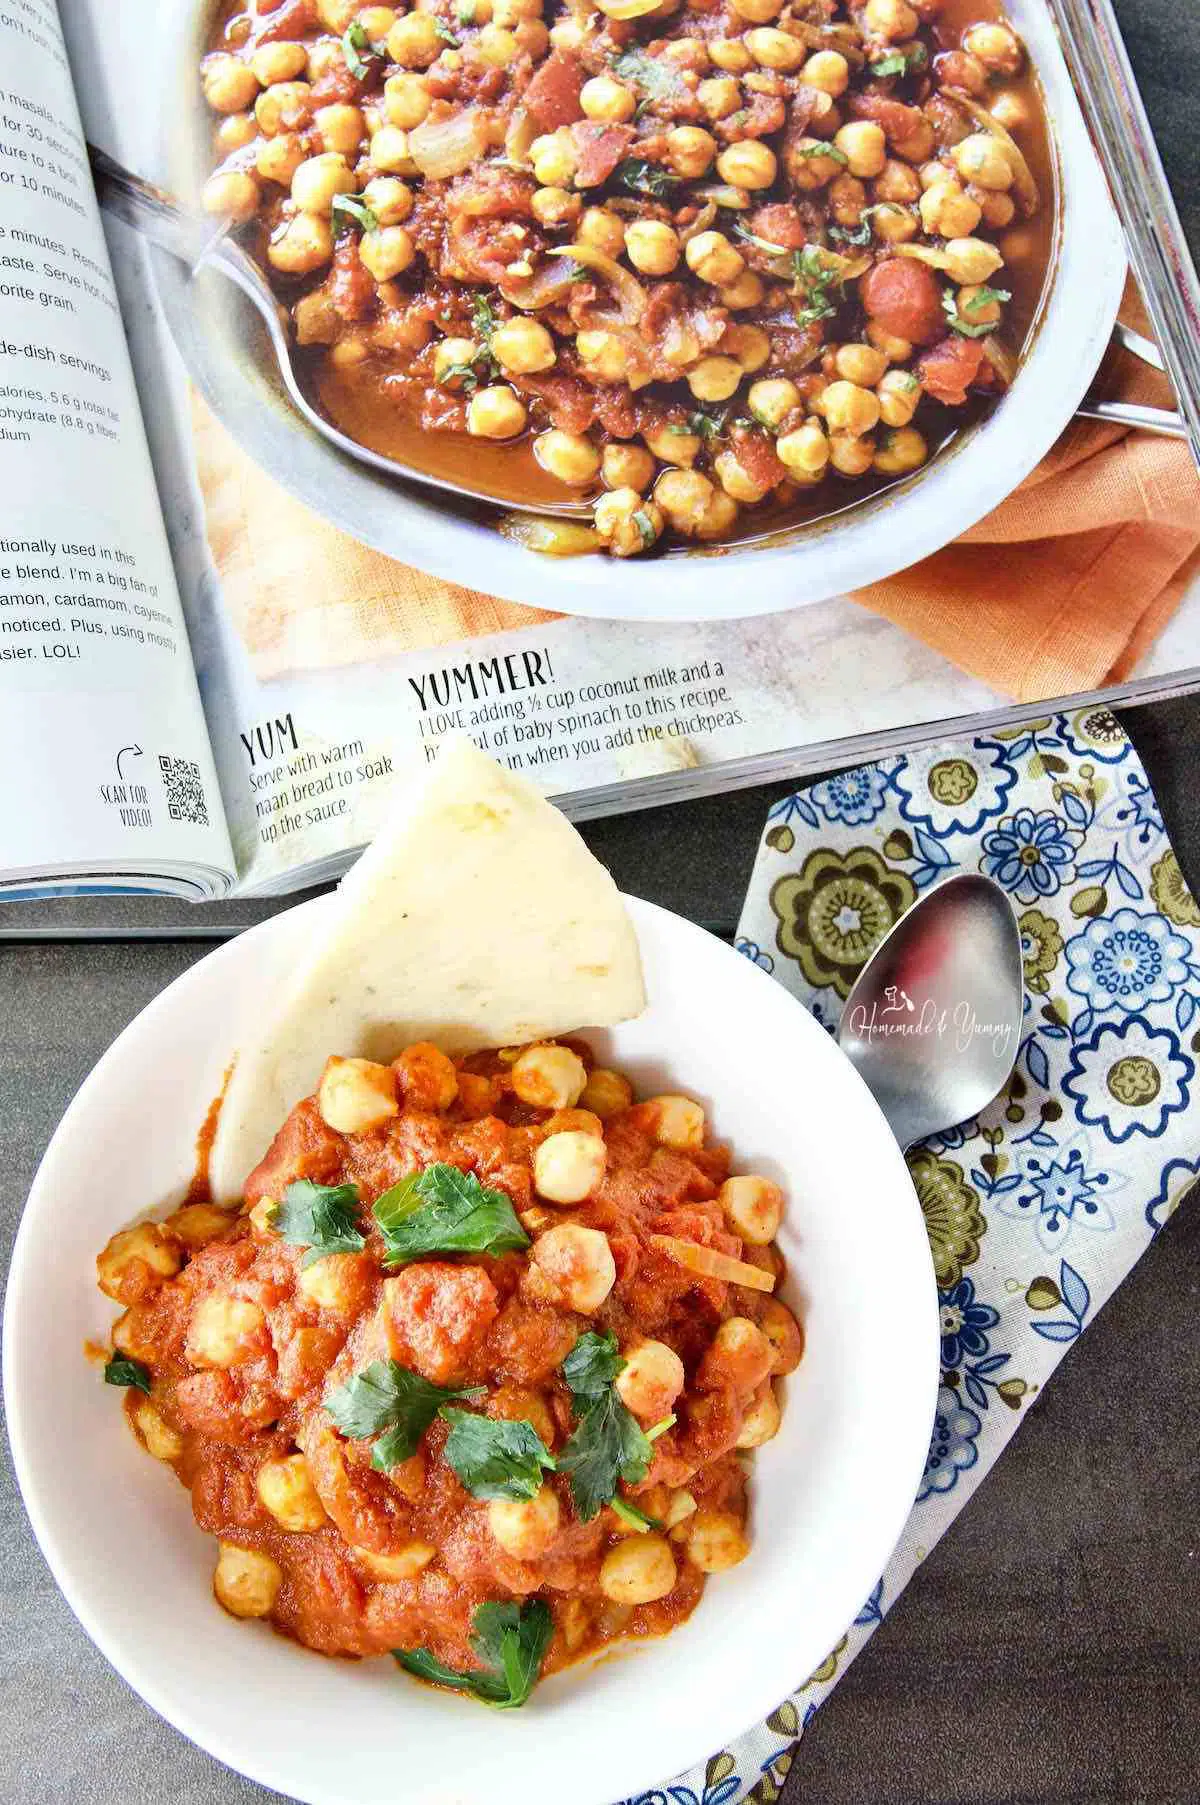 Indian chickpea stew in a bowl, cookbook in the background.